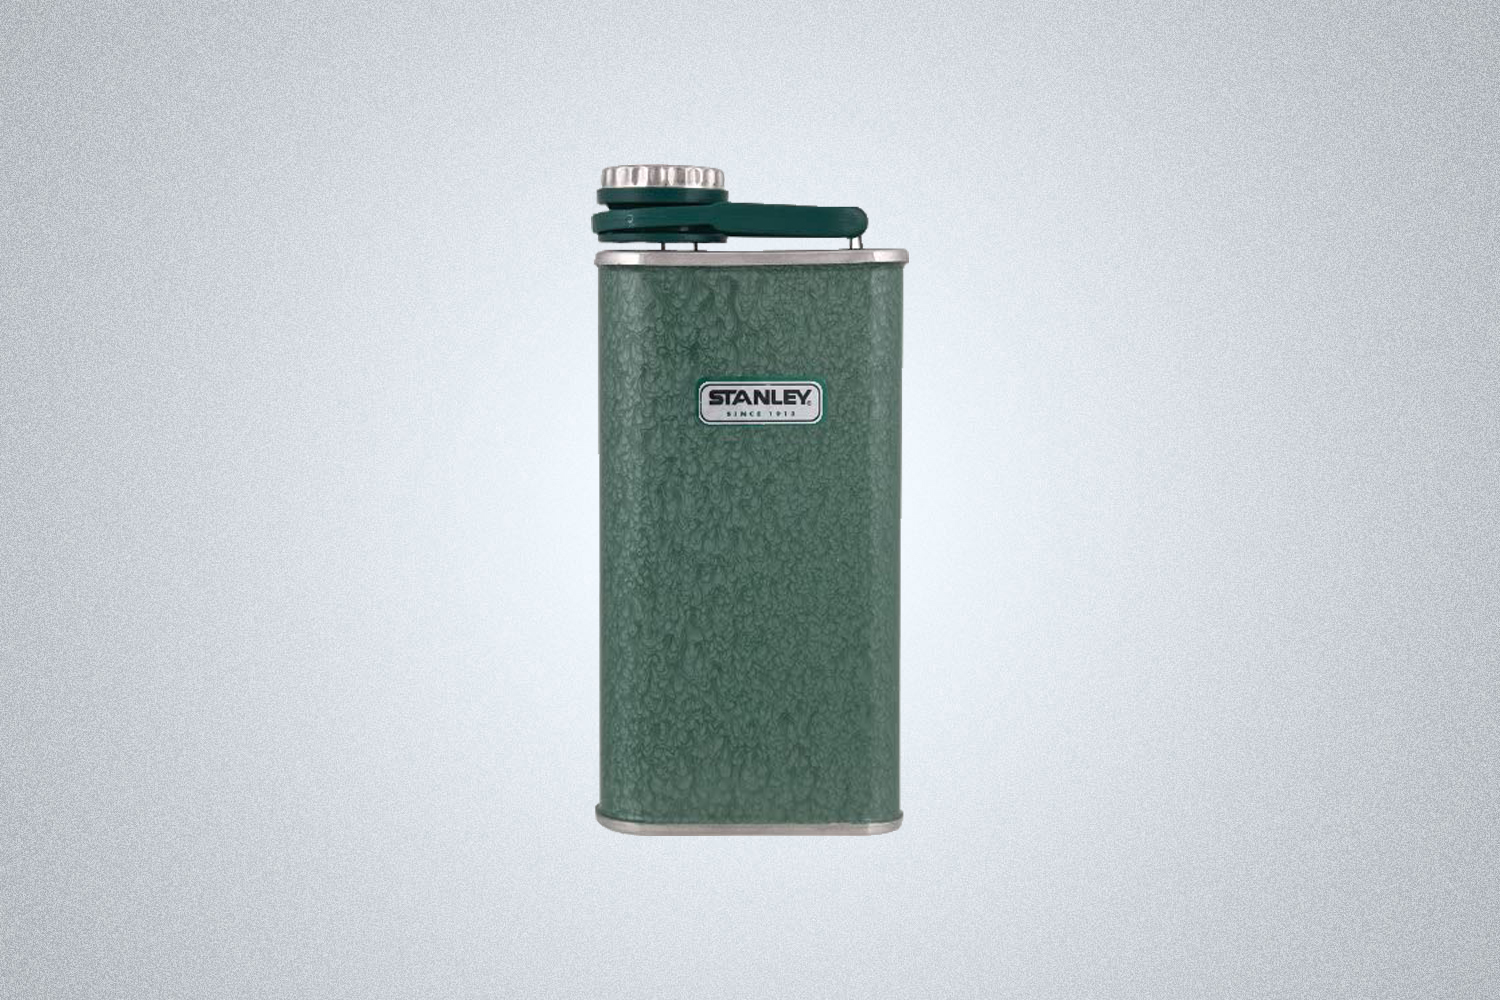 The Stanley Classic Flask is one of the best flasks for camping in 2022